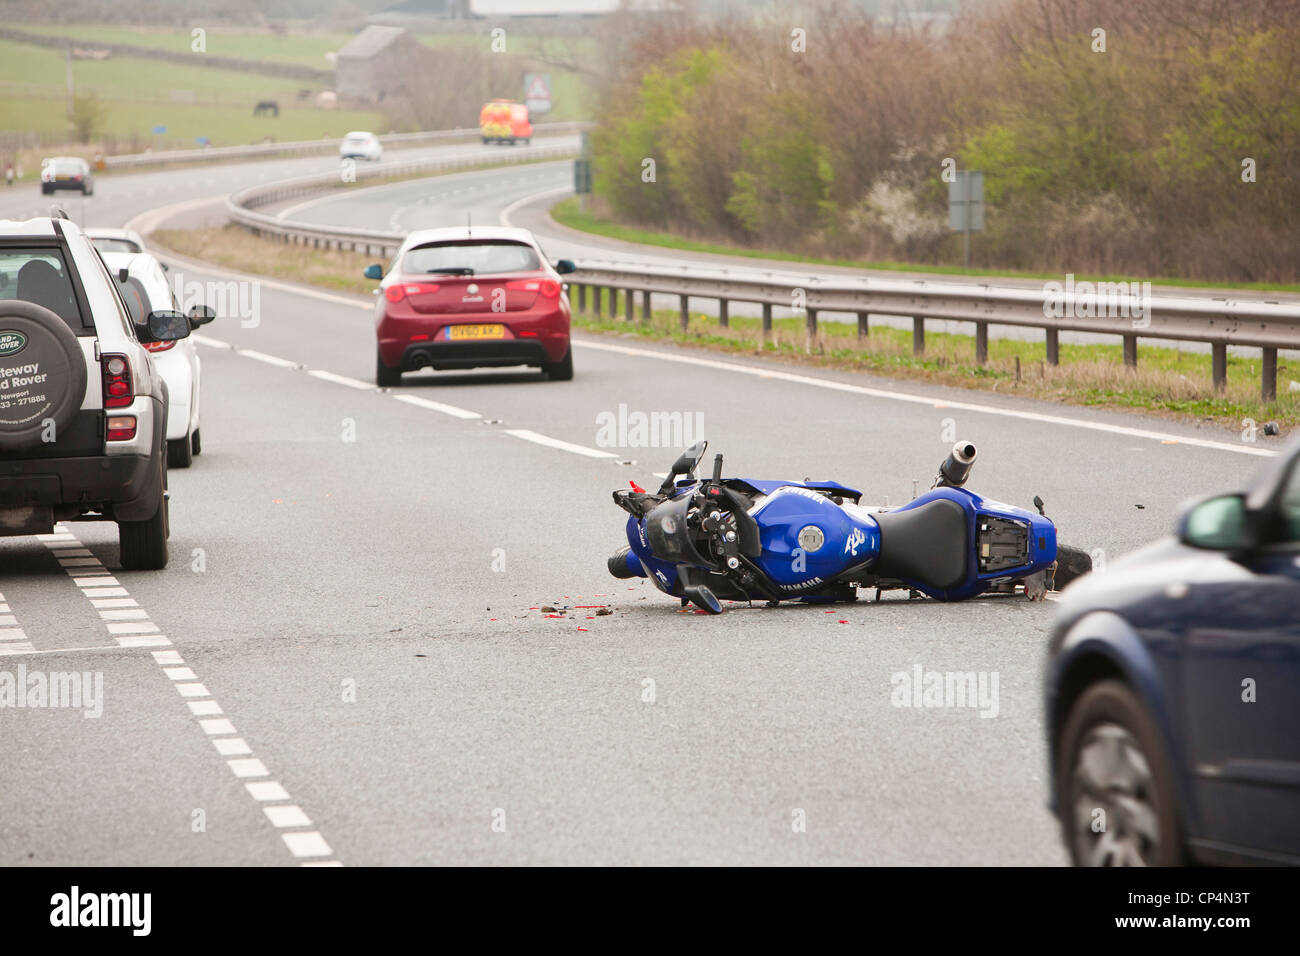 An RTA involving a car and a motorcycle on the A66 at Penrith, Cumbria, UK. Stock Photo